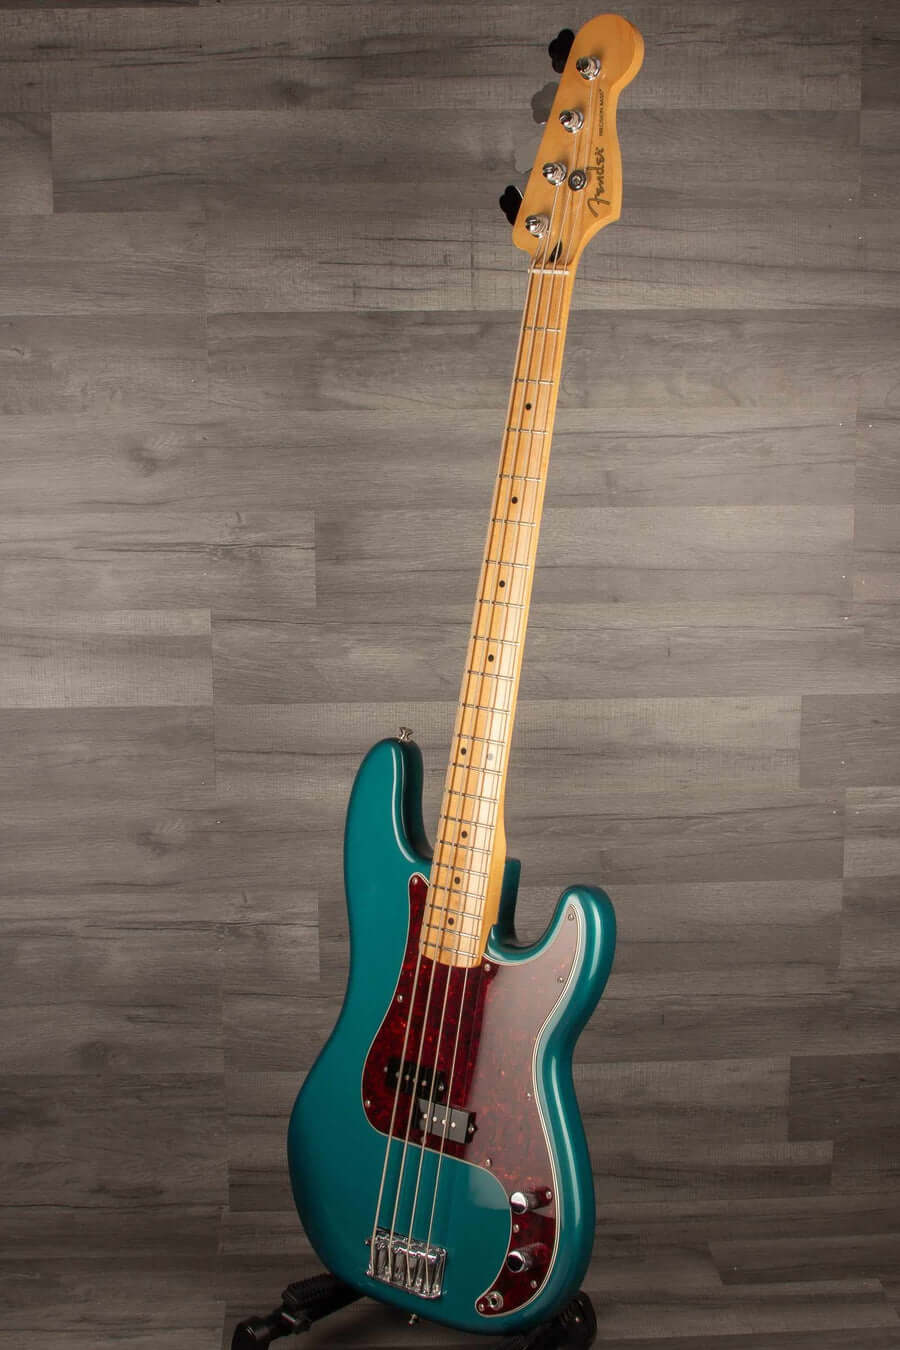 USED - Fender FSR Player Precision Bass Ocean Turquoise